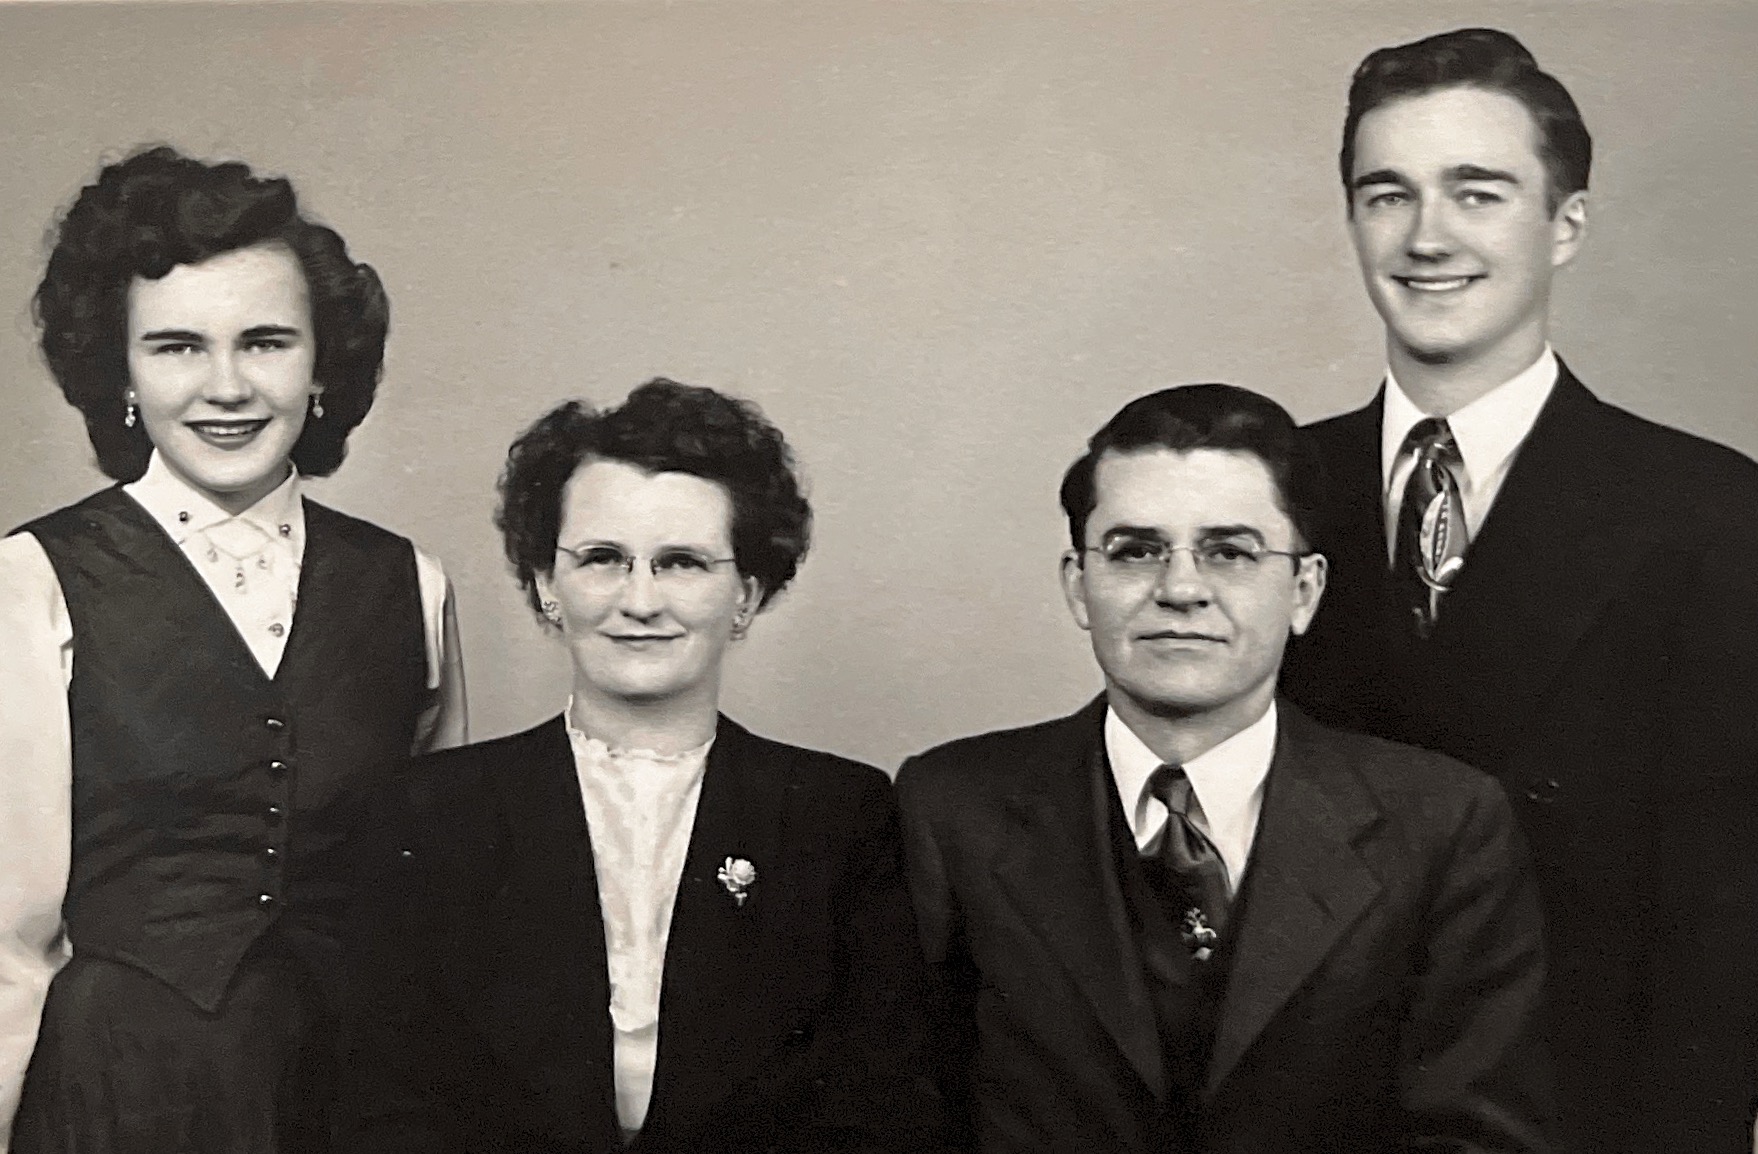 My grandfather was a Lutheran minister in a small farming town in southwest Illinois when this photo was taken of his family: daughter Delores, wife Ruth, Waldemar, and Herb (who would later become my dad). Probably 1948.